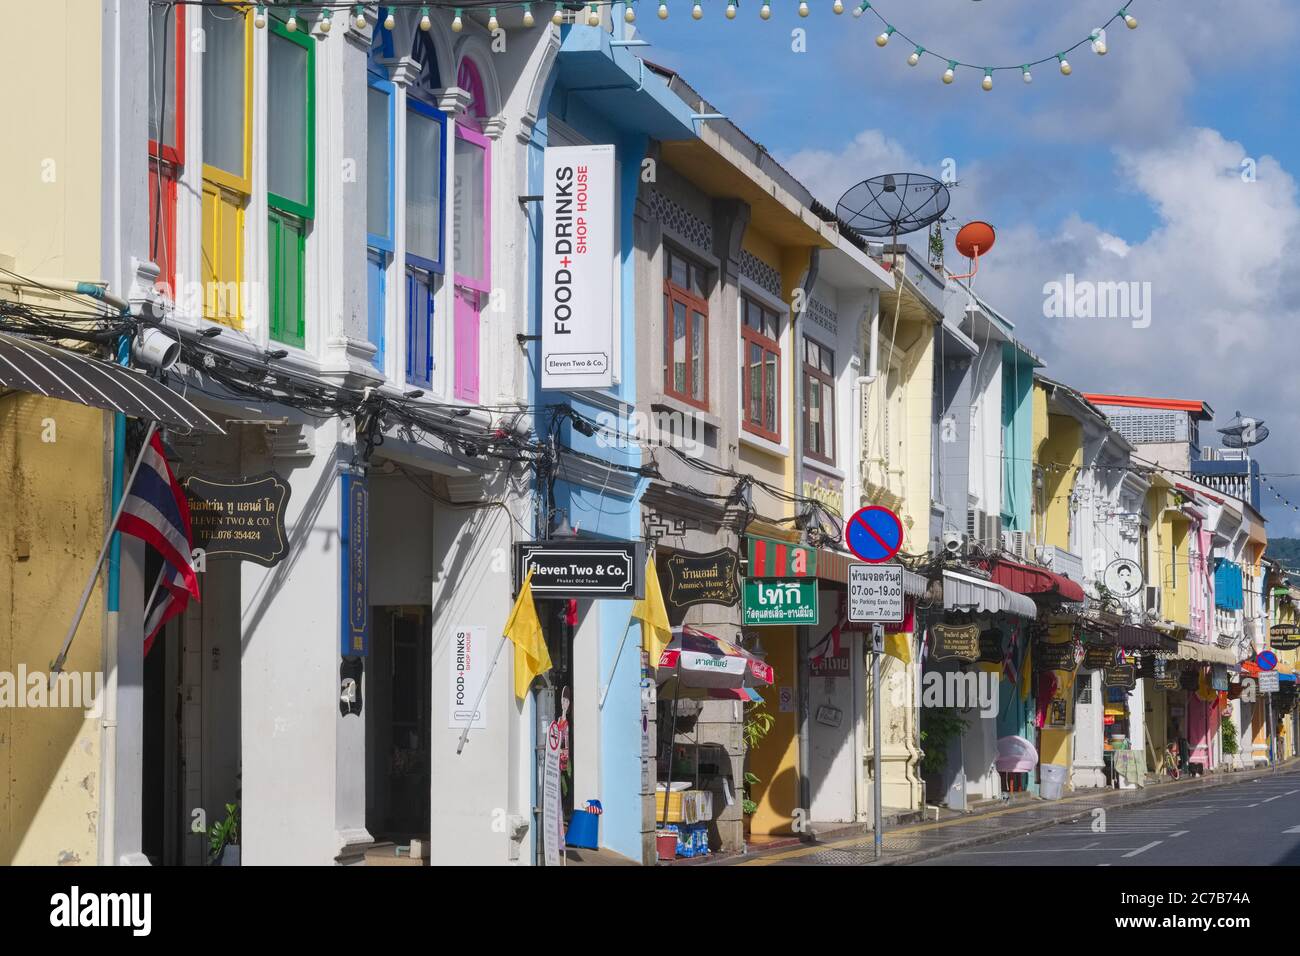 Colorful traditional Sino-Portuguese shophouses in Thalang Road in the Old Town (Chinatown) area of Phuket Town (Phuket City), Phuket, Thailand Stock Photo